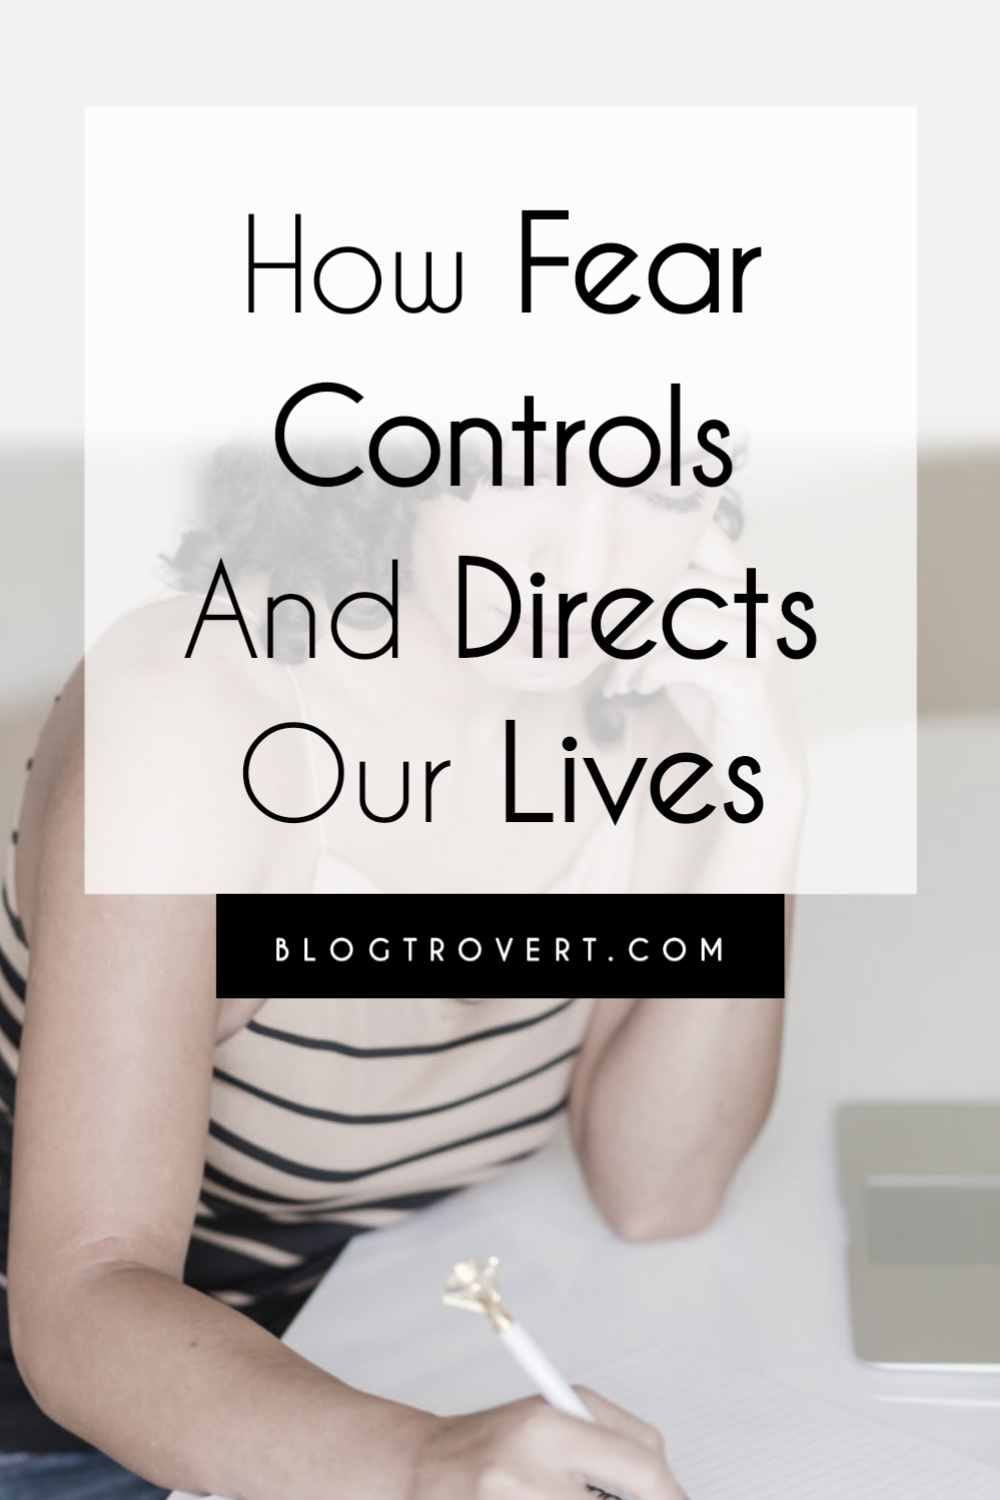 How fear controls us - Why we must take over 2